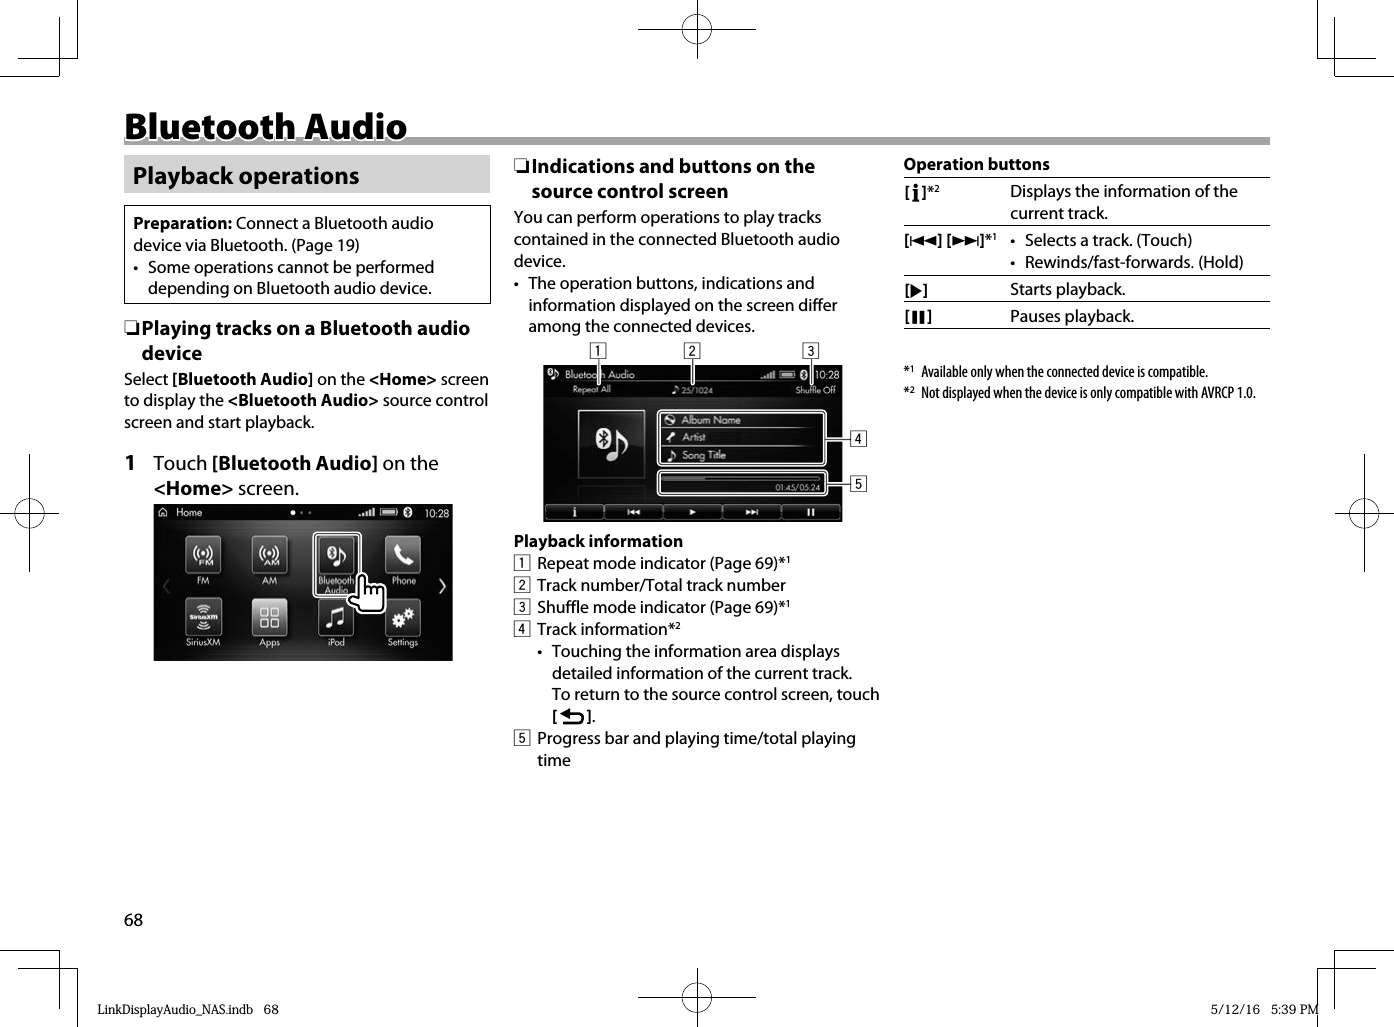 68Bluetooth AudioBluetooth AudioPlayback operationsPreparation: Connect a Bluetooth audio device via Bluetooth. (Page 19)•  Some operations cannot be performed depending on Bluetooth audio device. ❏ Playing tracks on a Bluetooth audio deviceSelect [Bluetooth Audio] on the &lt;Home&gt; screen to display the &lt;Bluetooth Audio&gt; source control screen and start playback.1 Touch [Bluetooth Audio] on the &lt;Home&gt; screen.  ❏ Indications and buttons on the source control screenYou can perform operations to play tracks contained in the connected Bluetooth audio device.•  The operation buttons, indications and information displayed on the screen differ among the connected devices.12 345Playback information1  Repeat mode indicator (Page 69)*12  Track number/Total track number3  Shuffle mode indicator (Page 69)*14 Track information*2•  Touching the information area displays detailed information of the current track. To return to the source control screen, touch [   ].5  Progress bar and playing time/total playing timeOperation buttons[   ]*2Displays the information of the current track.[S] [T]*1•  Selects a track. (Touch)• Rewinds/fast-forwards. (Hold) [I]Starts playback.[W]Pauses playback.*1  Available only when the connected device is compatible.*2  Not displayed when the device is only compatible with AVRCP 1.0.LinkDisplayAudio_NAS.indb   68LinkDisplayAudio_NAS.indb   68 5/12/16   5:39 PM5/12/16   5:39 PM